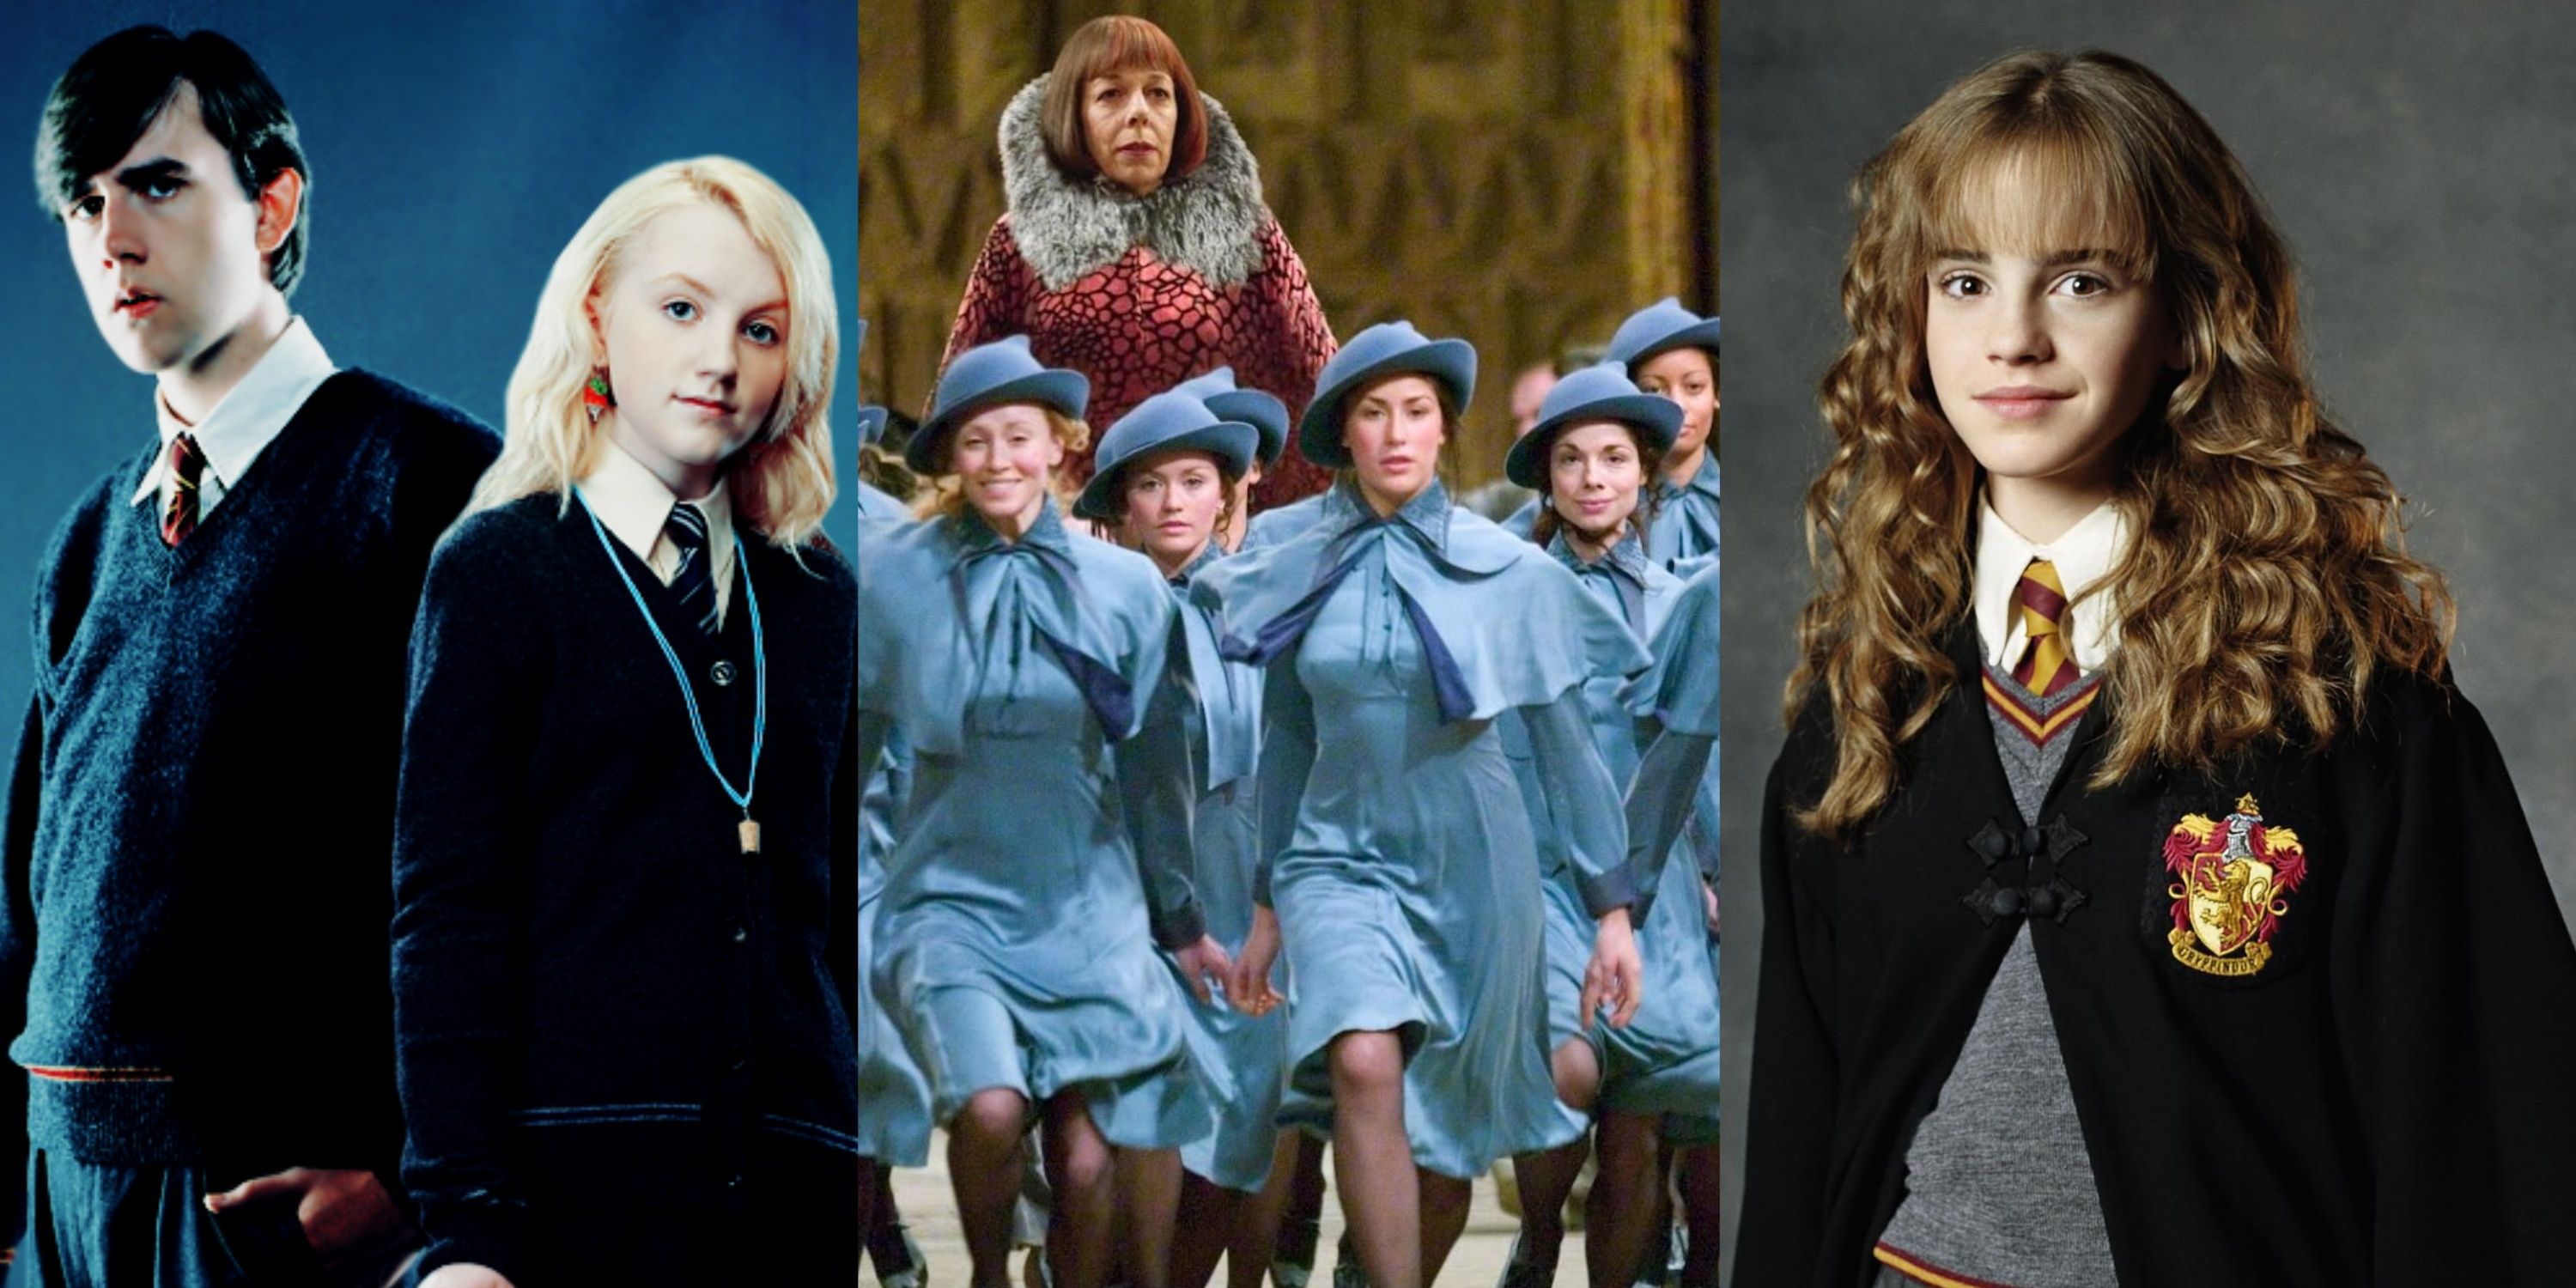 Neville, Luna, the Beauxbatons girls, and Hermione from Harry Potter